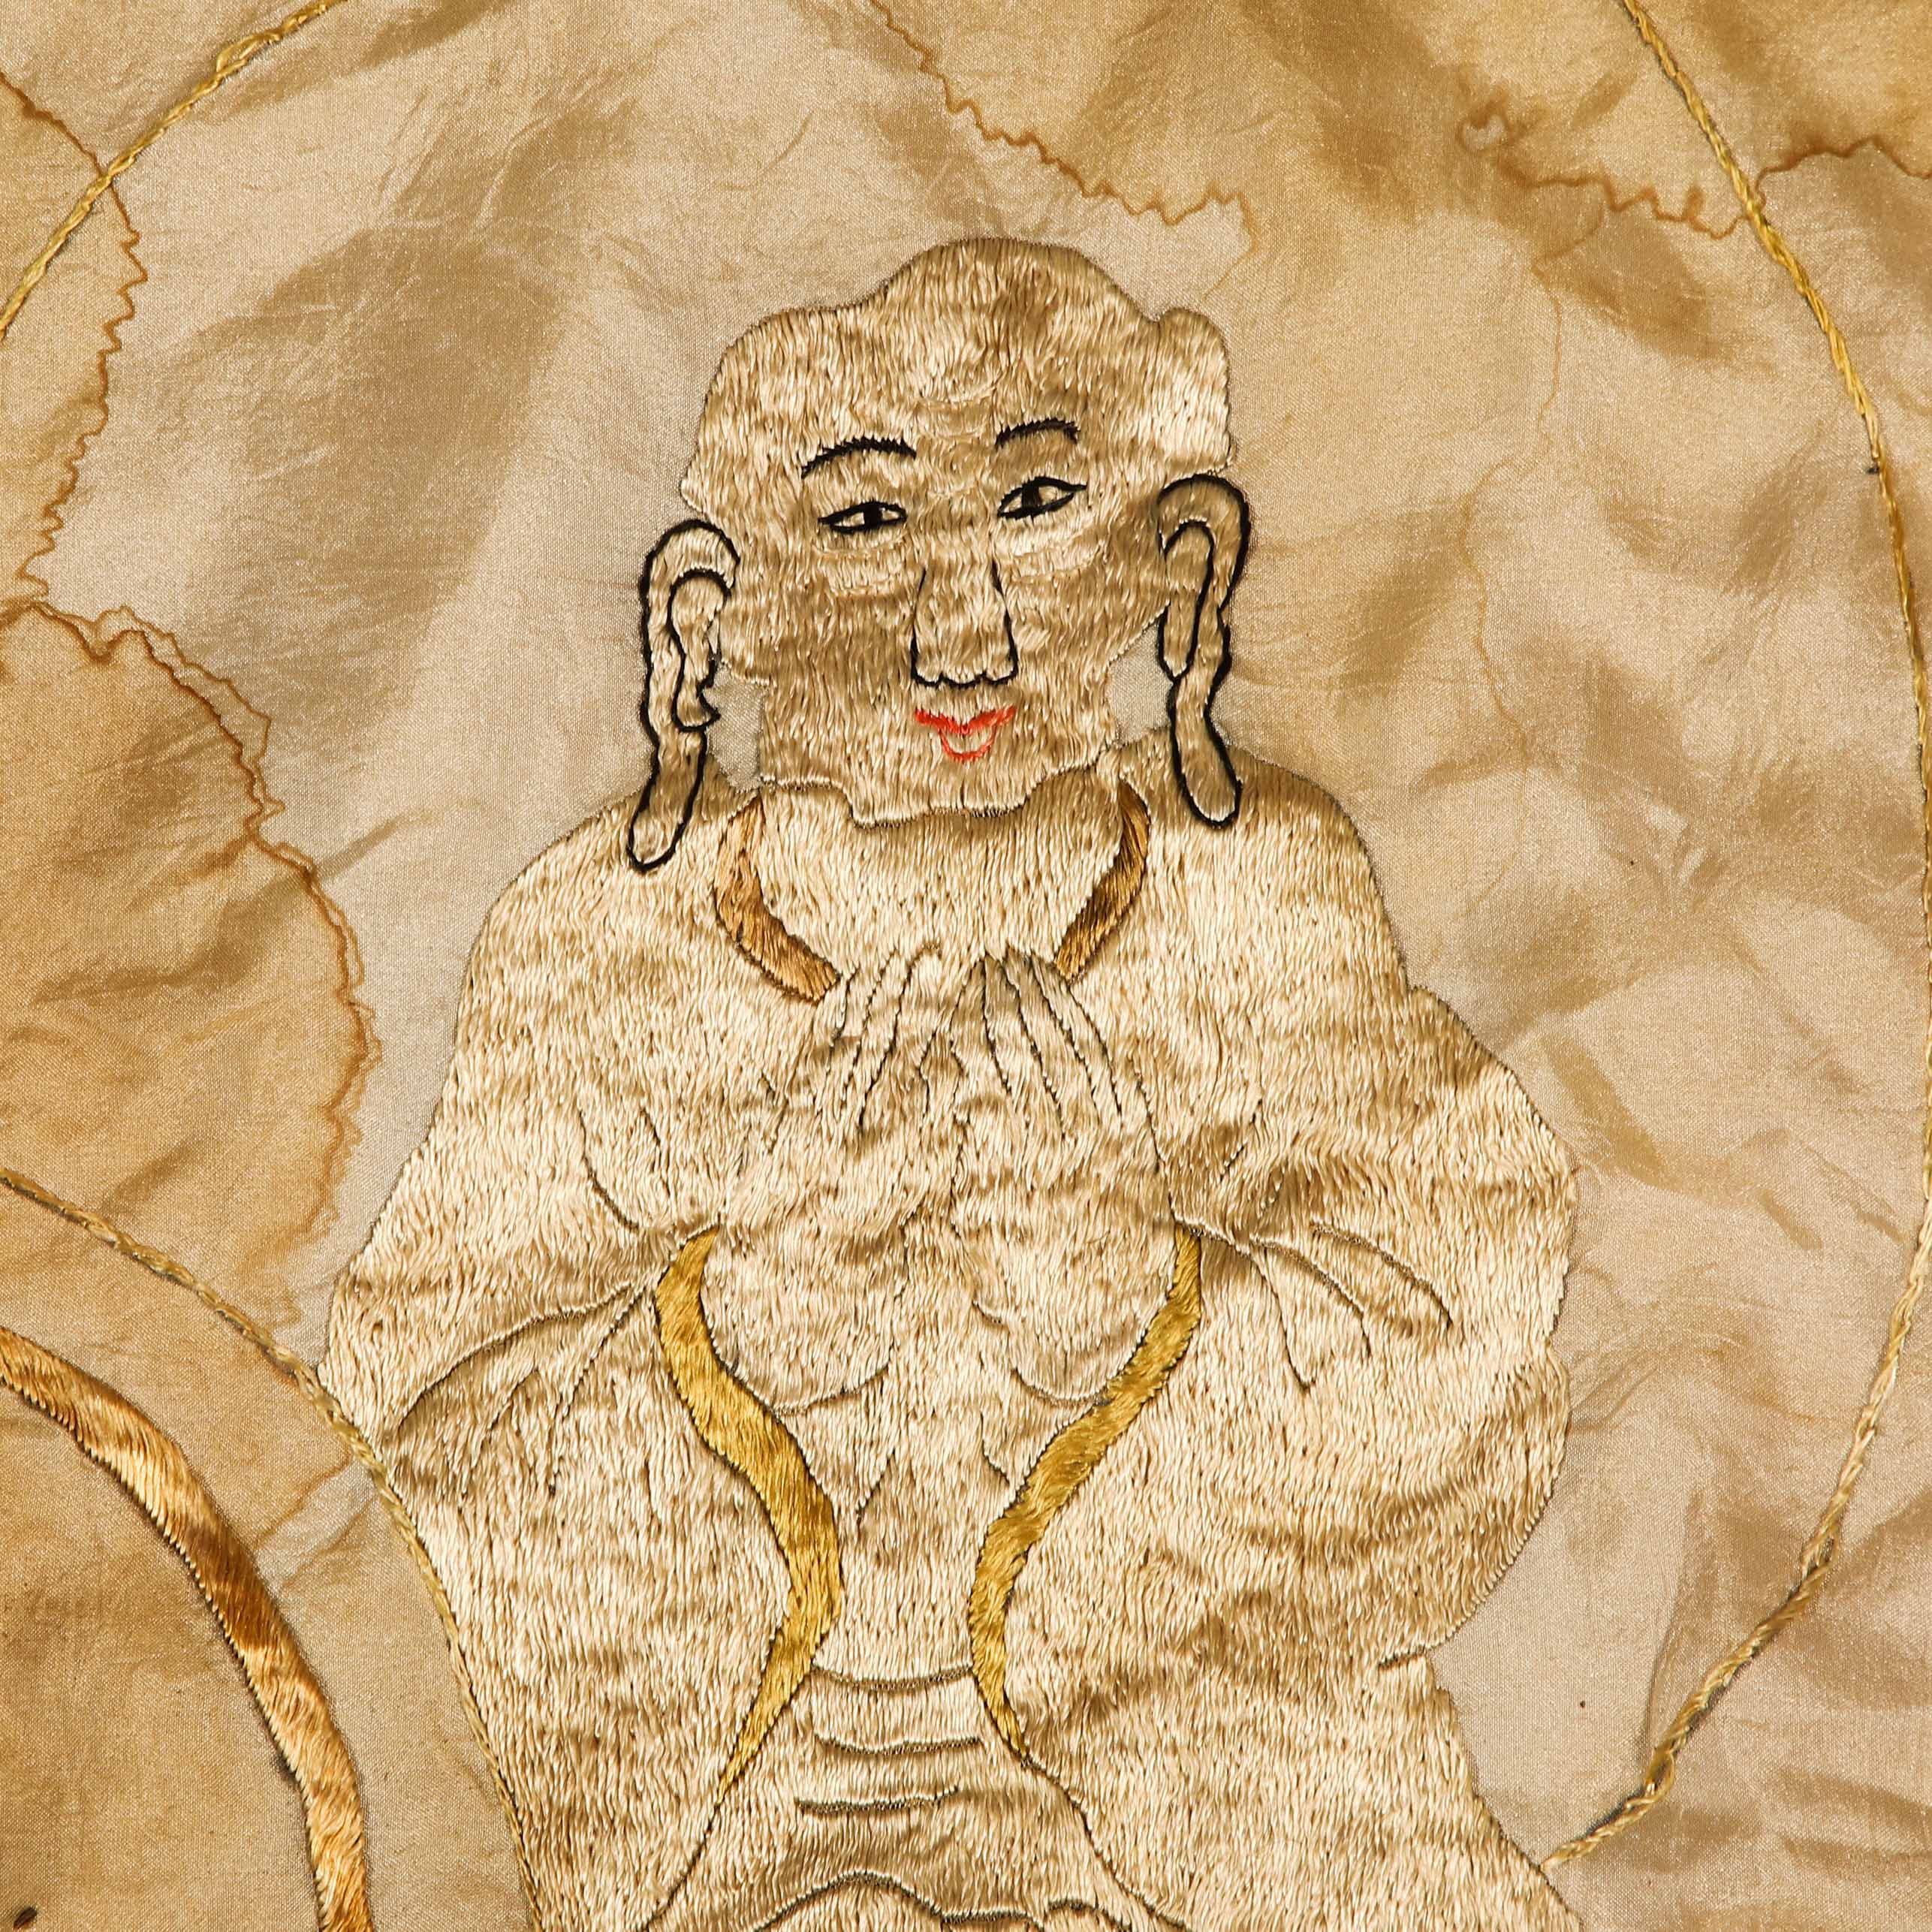 Qing dynasty embroidered thangka - Image 8 of 9